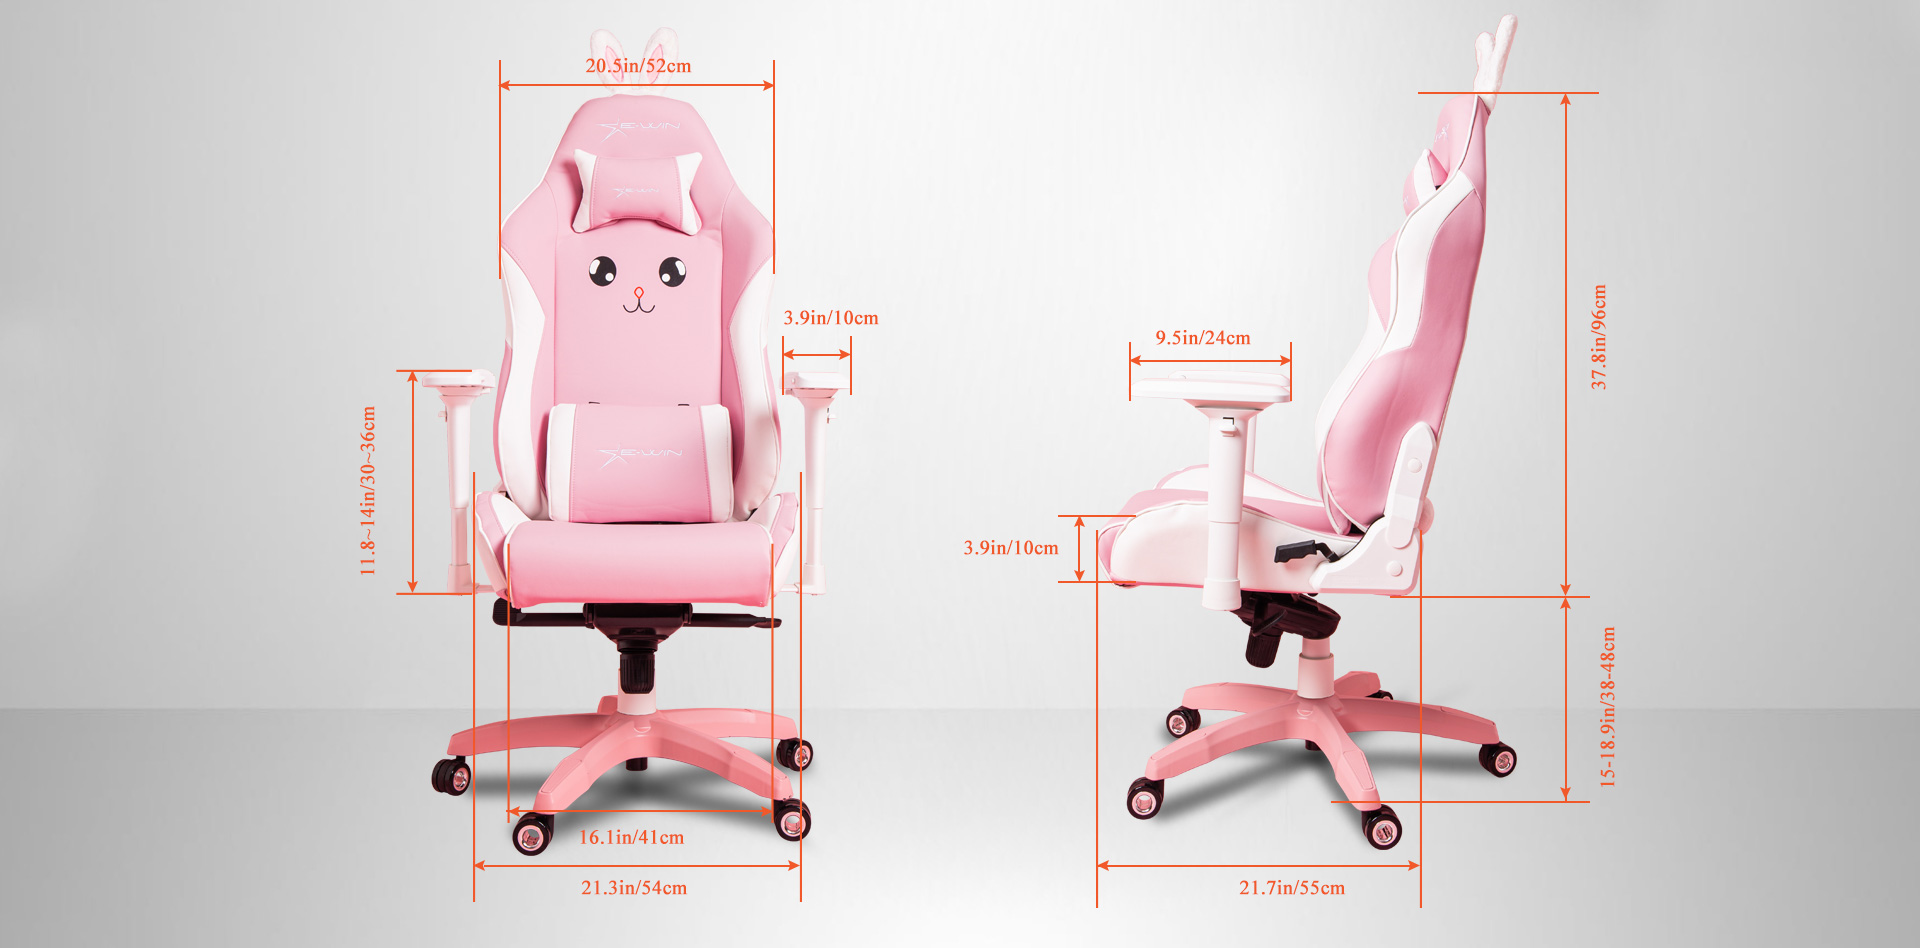 E-WIN Gaming Chair Dimensions